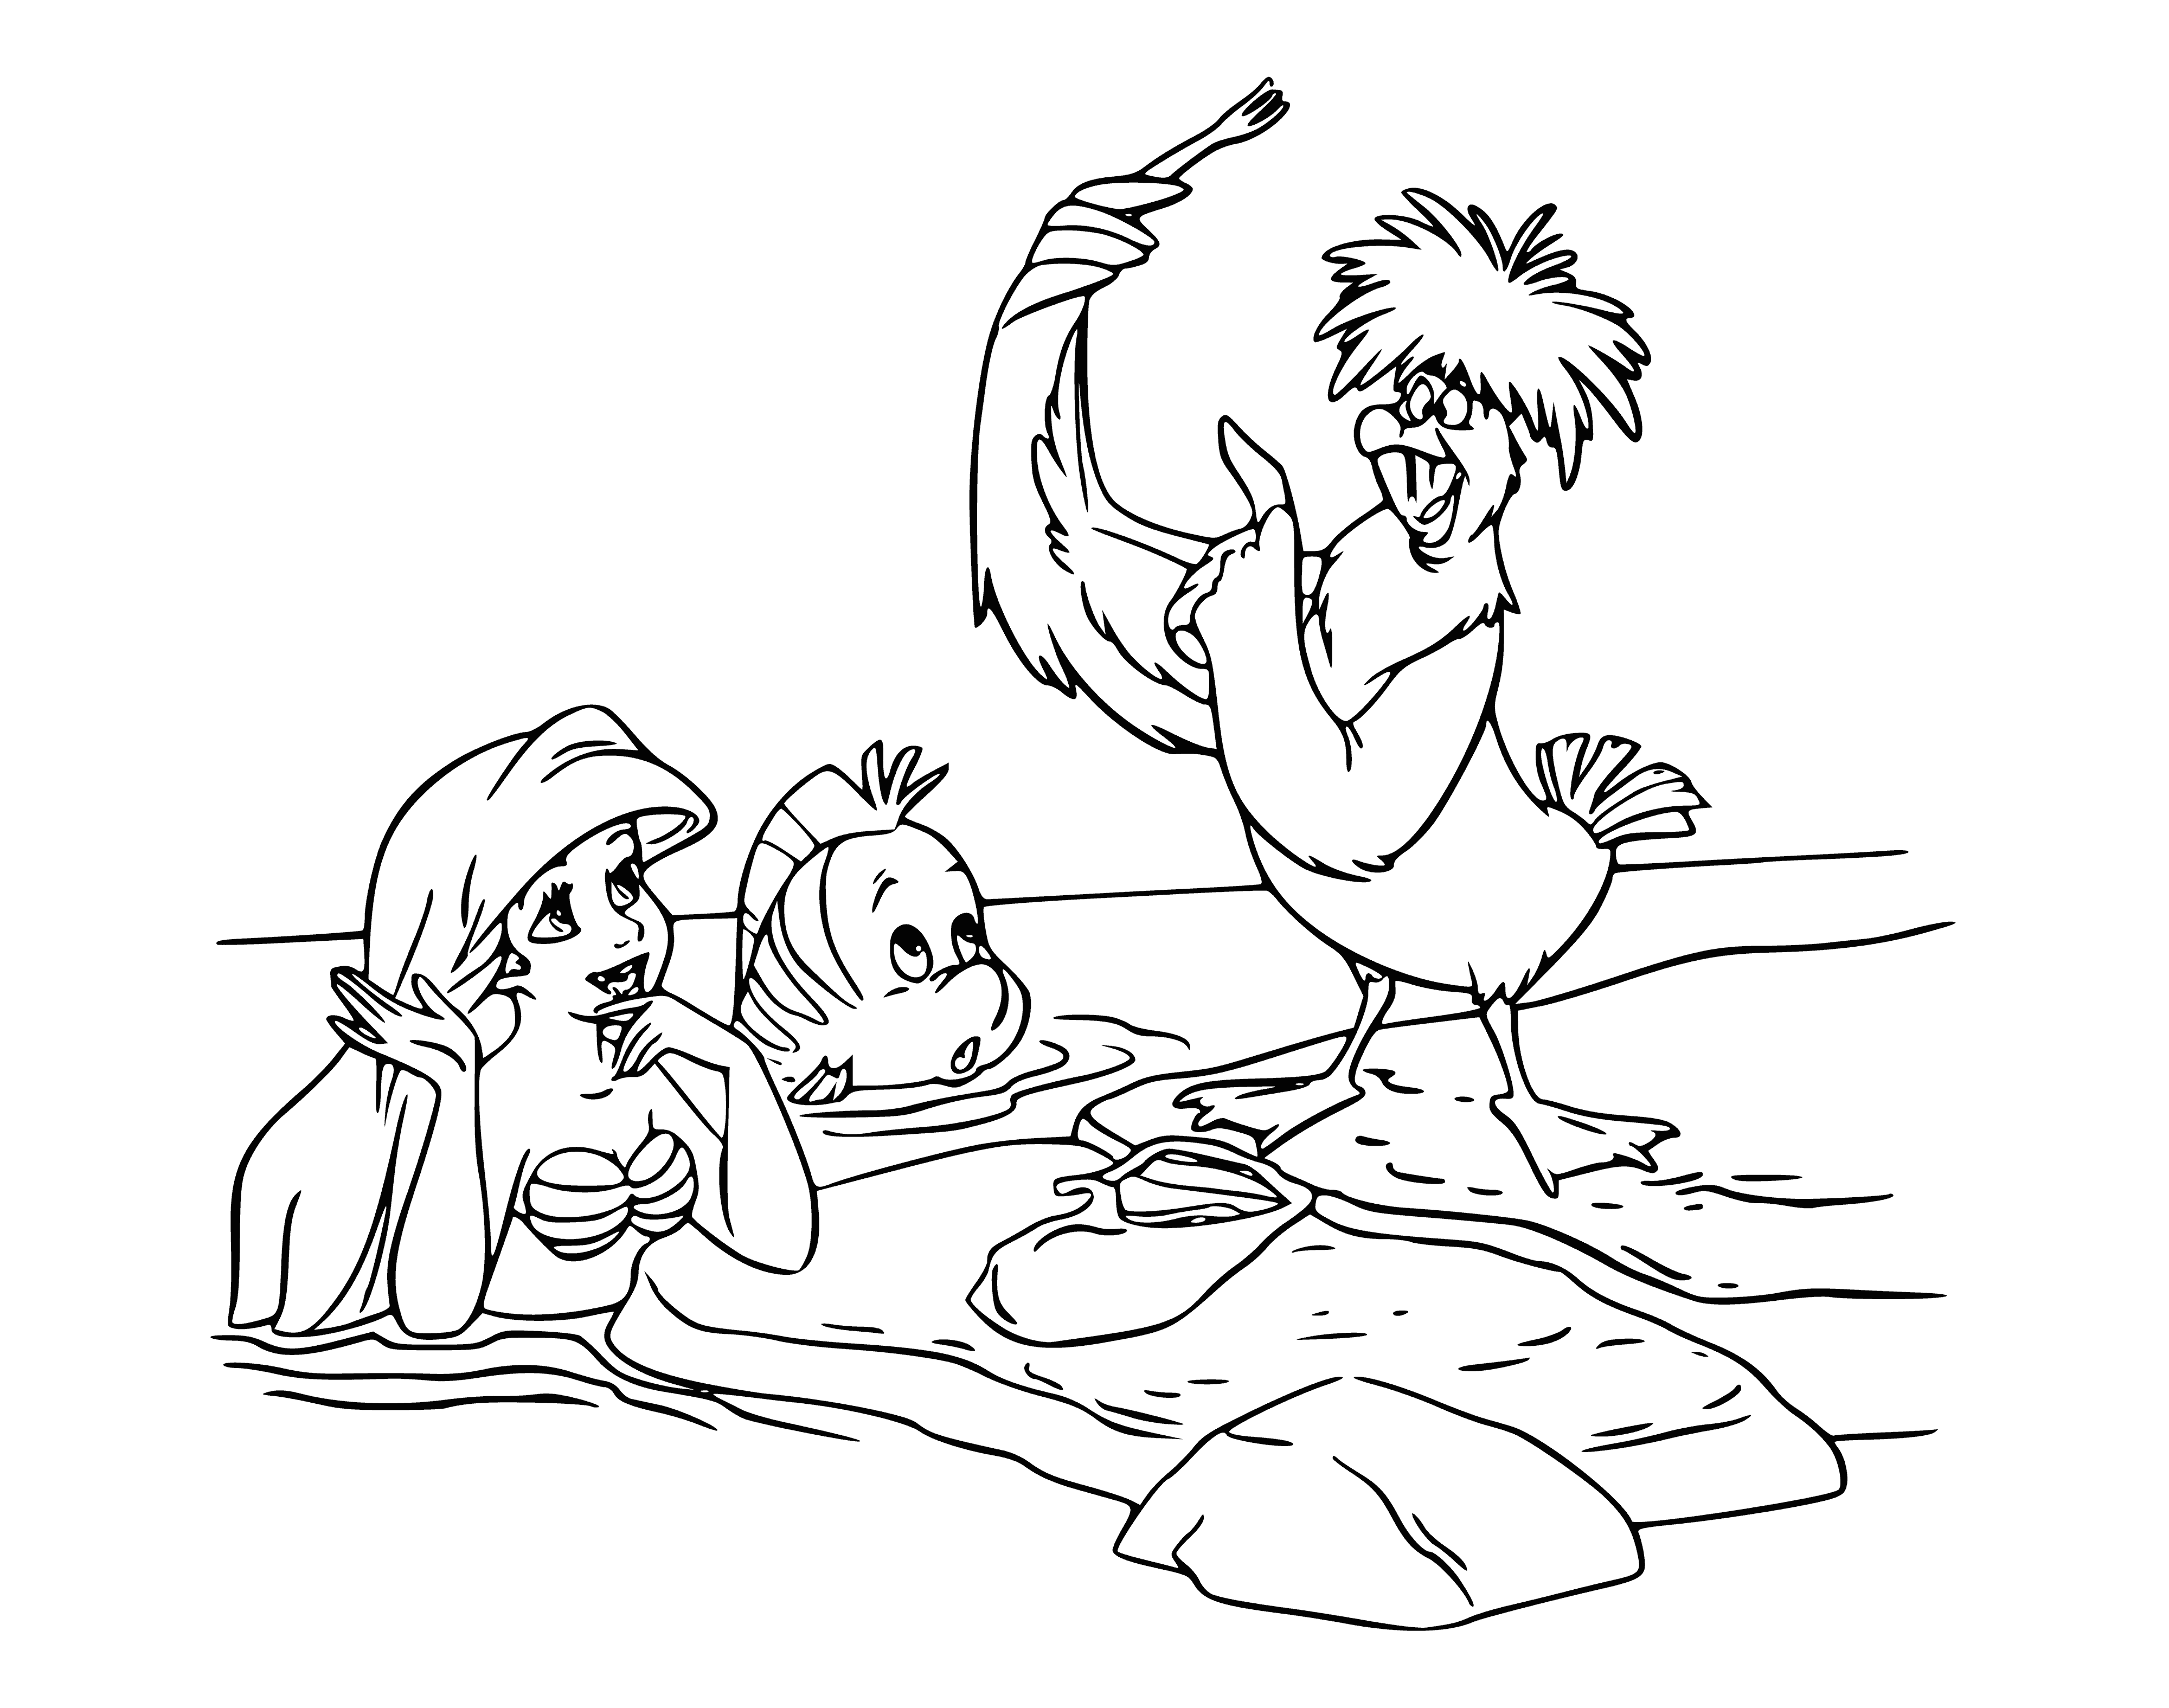 coloring page: A stormy night a hundred yrs ago, and baby Ariel was born, with a fork in hand - she could swim before she could walk & her mom realized she was special. #specialbabe